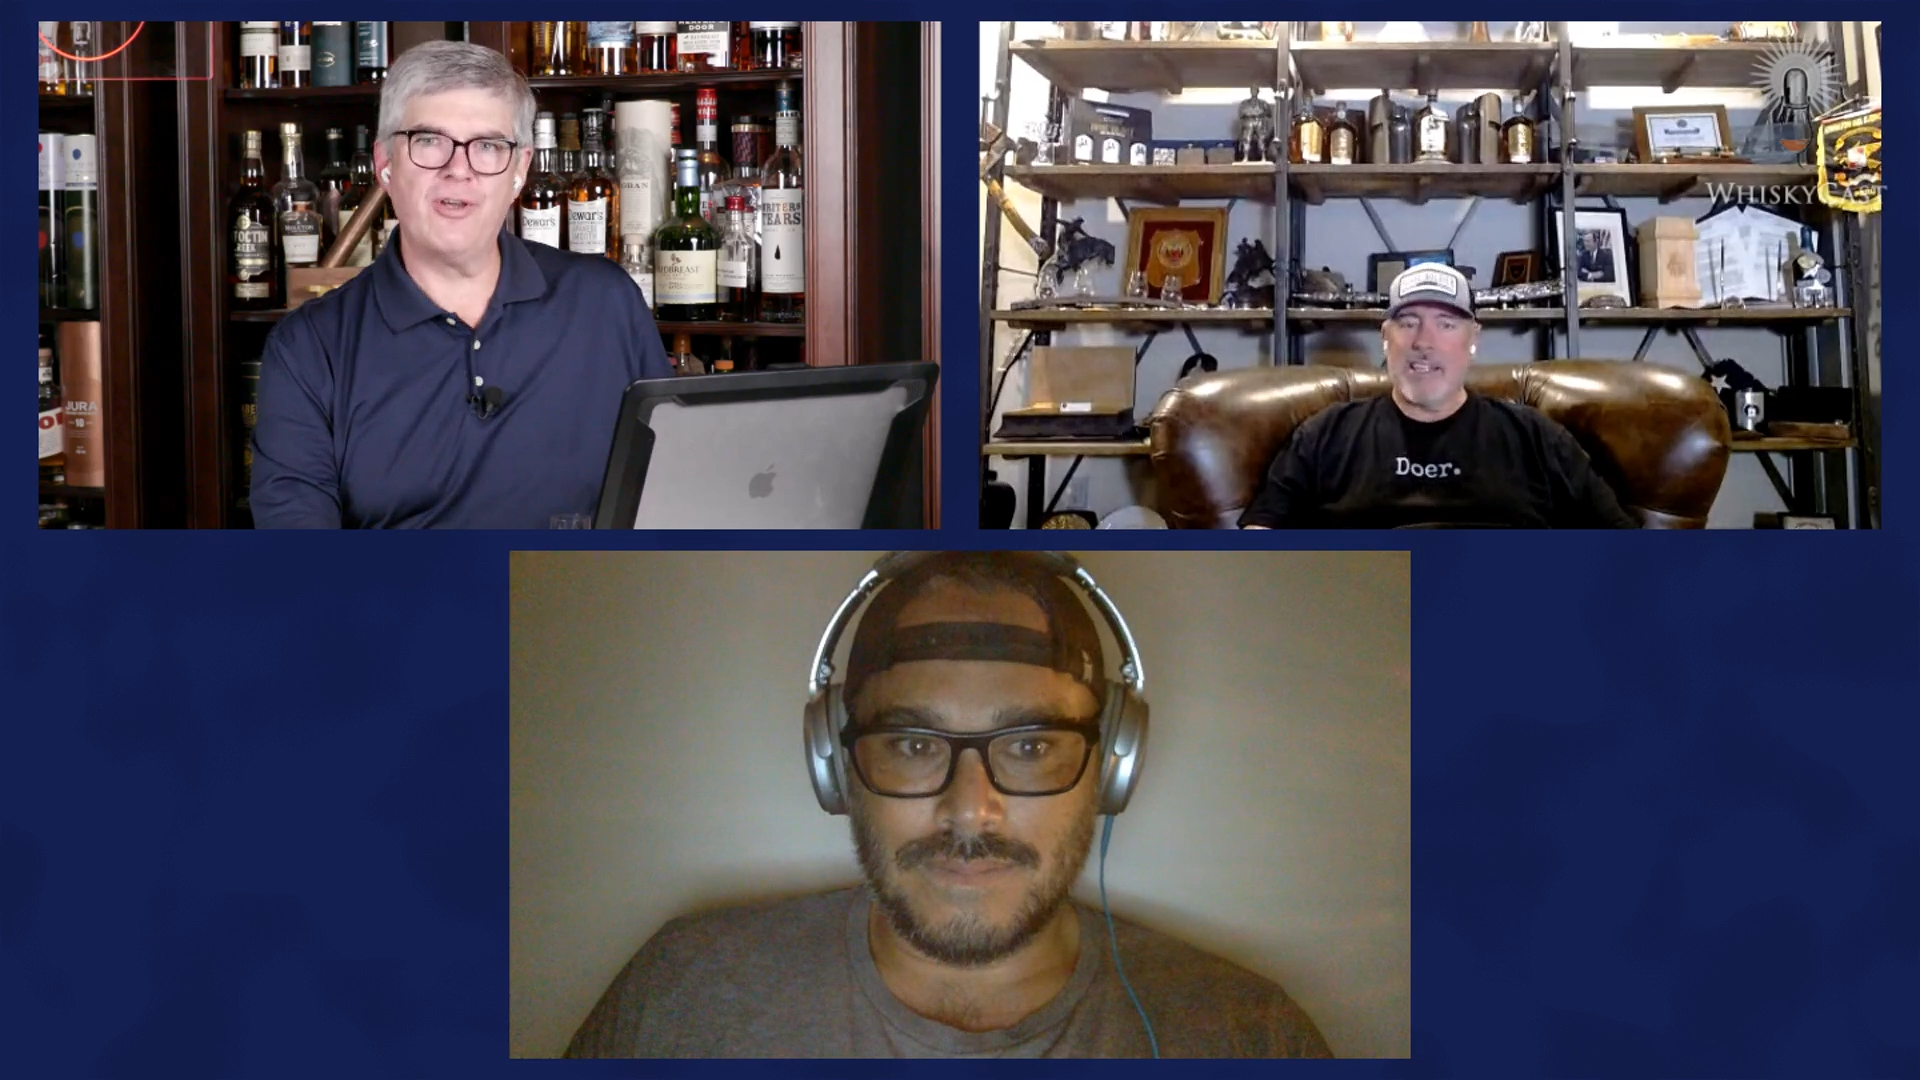 Scott Neil of Horse Soldier Bourbon and Nick Ravenhall of the Whisky Smugglers joined us on the latest #HappyHourLive webcast, and the on-demand replay is available now at our YouTube channel!